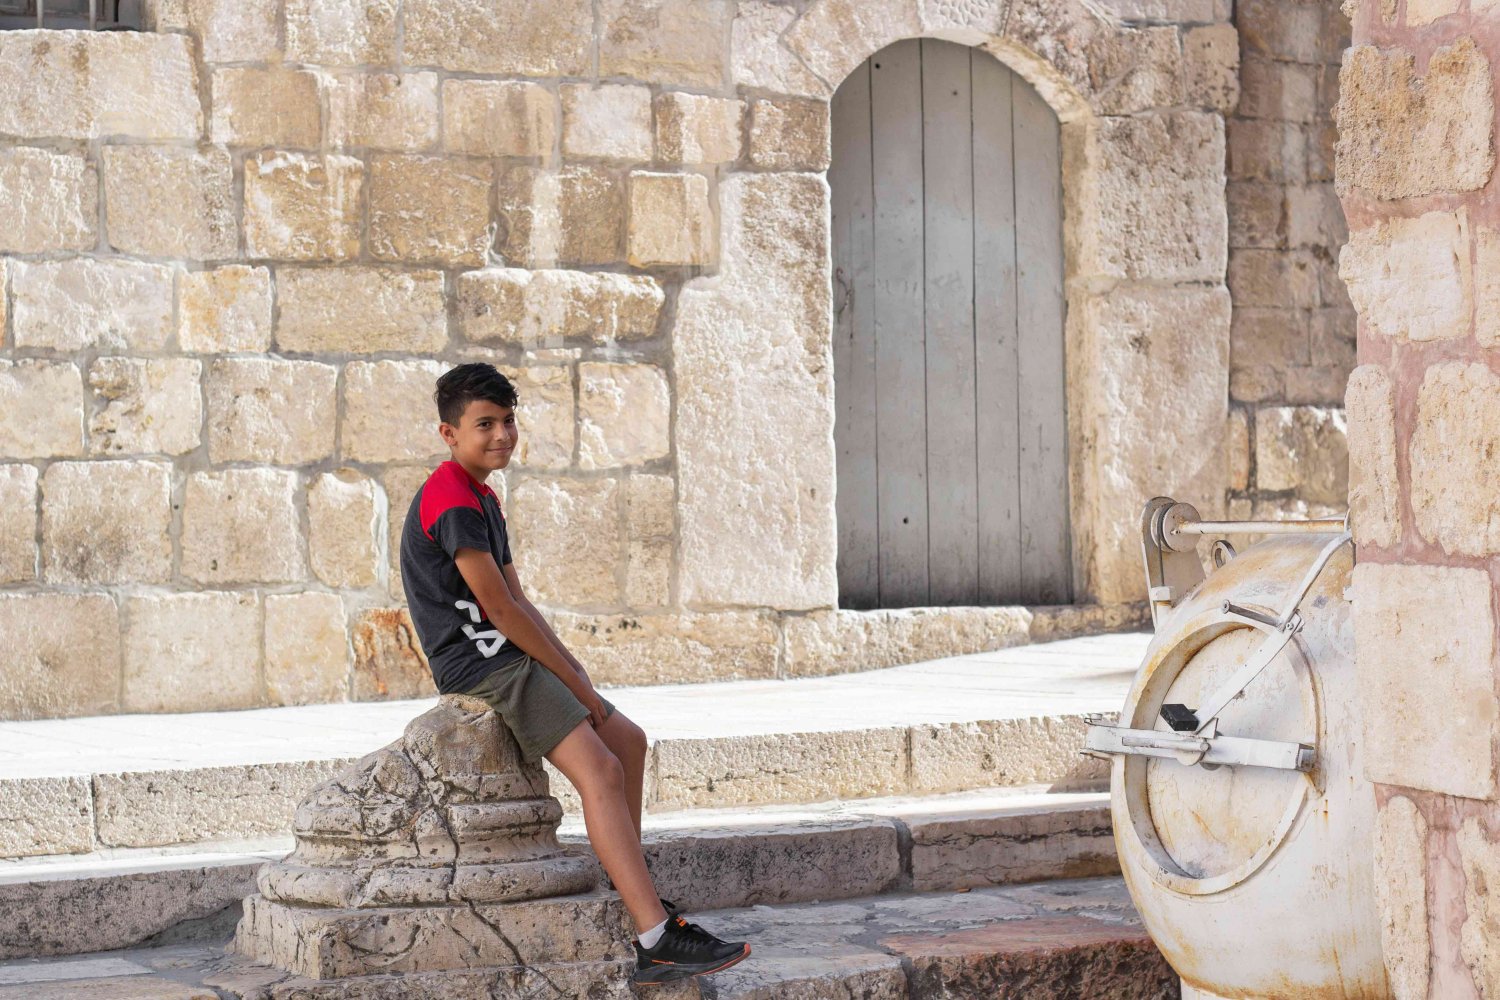 A boy rests on a well-worn ancient stone edifice in the Old City of Jerusalem, August 30, 2021.